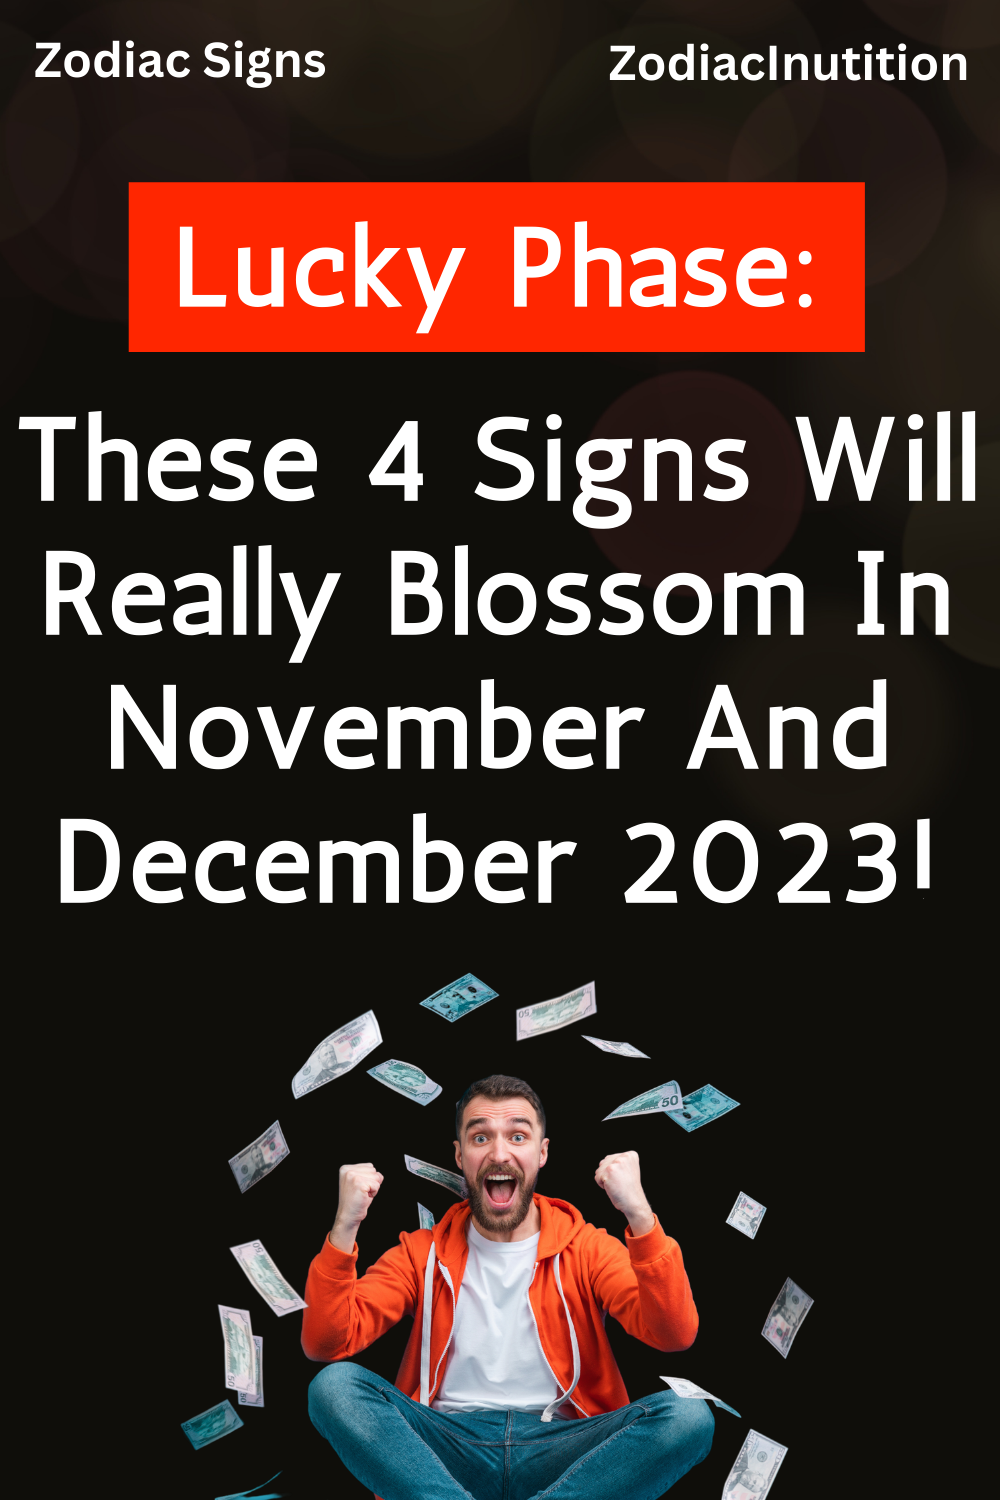 Lucky Phase: These 4 Signs Will Really Blossom In November And December 2023!